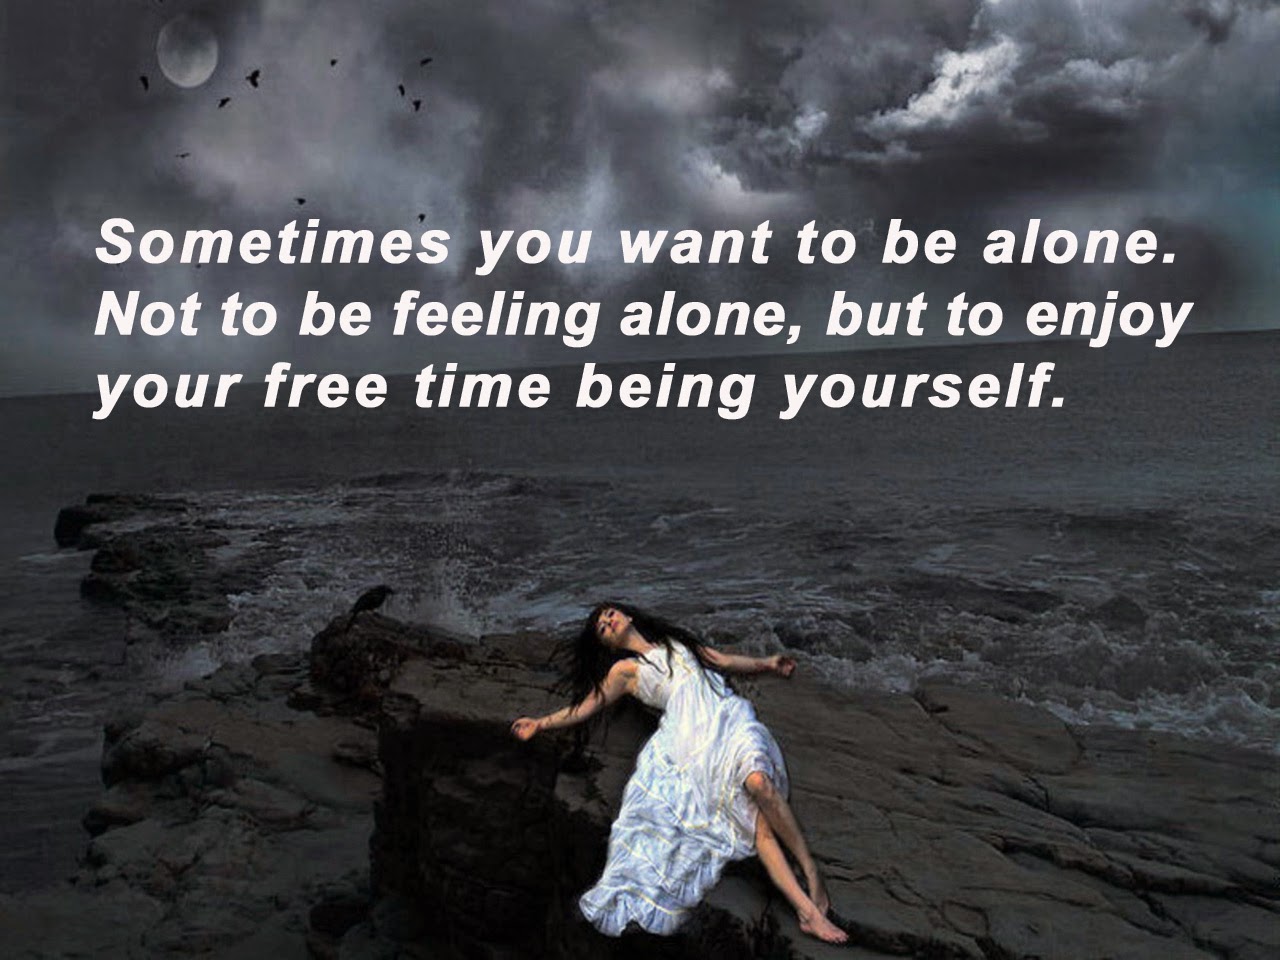 Not to be feeling alone. but to enjoy your free time being yourself. 